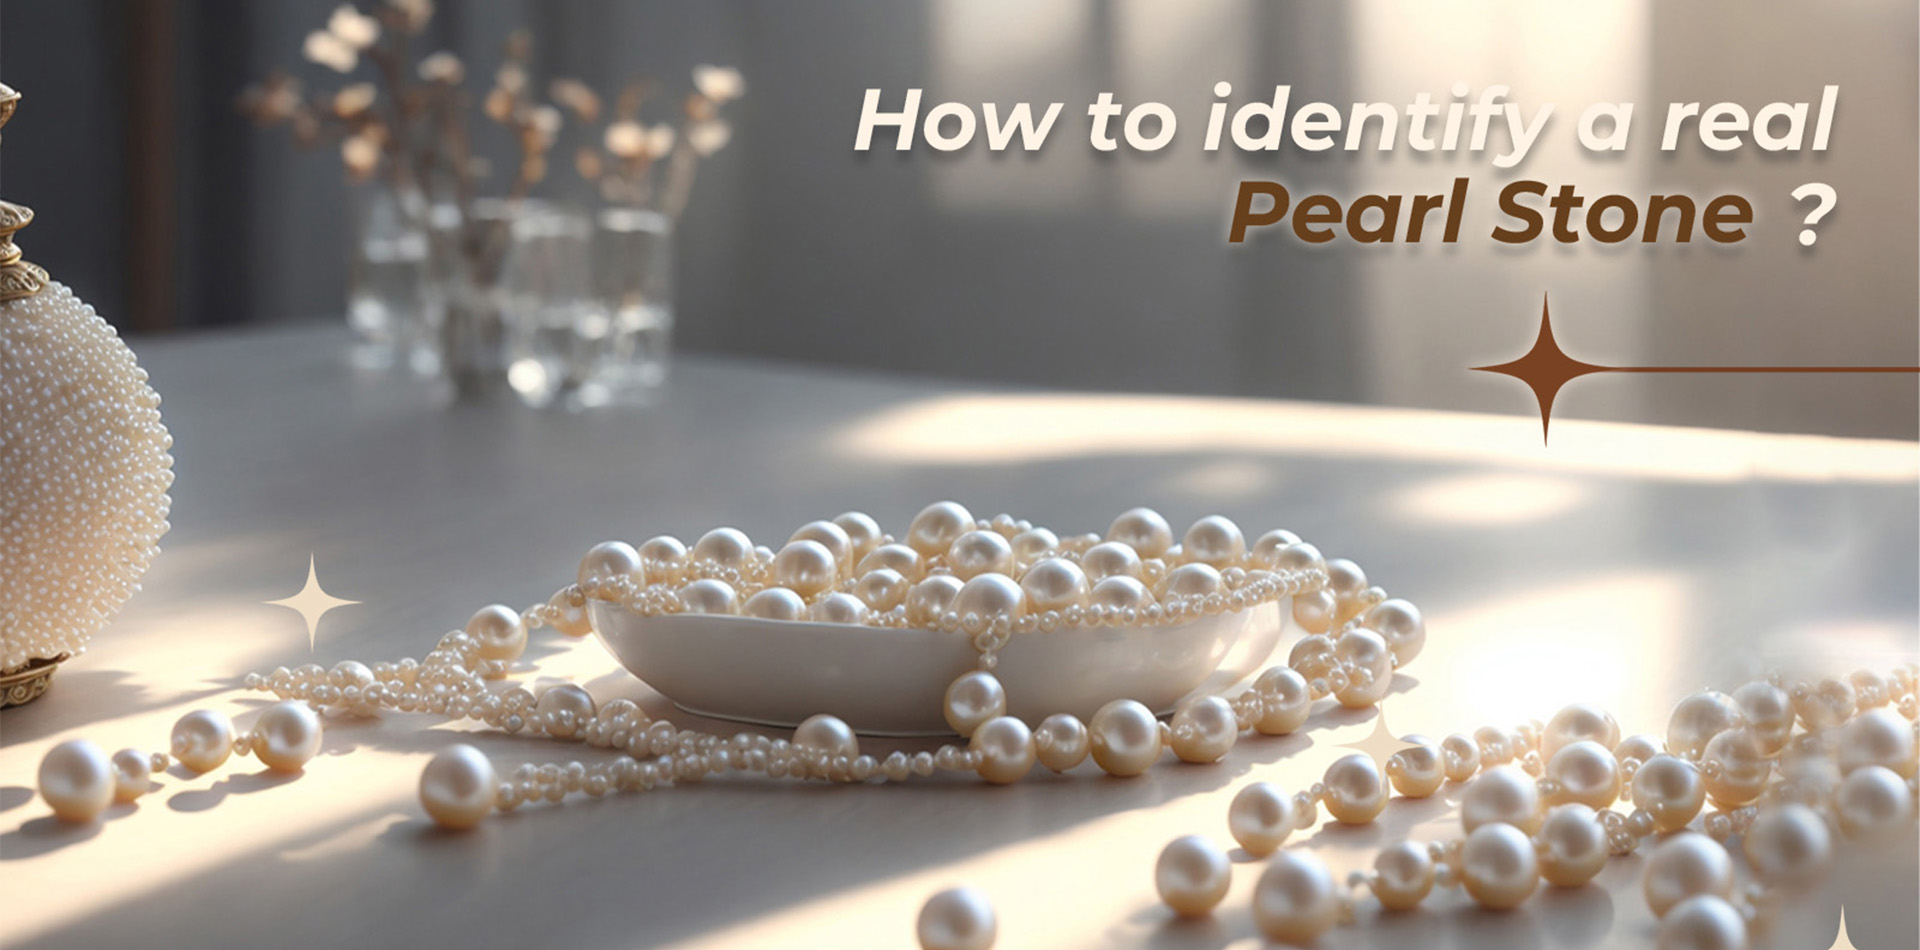 How to Identify a Real Pearl Stone?